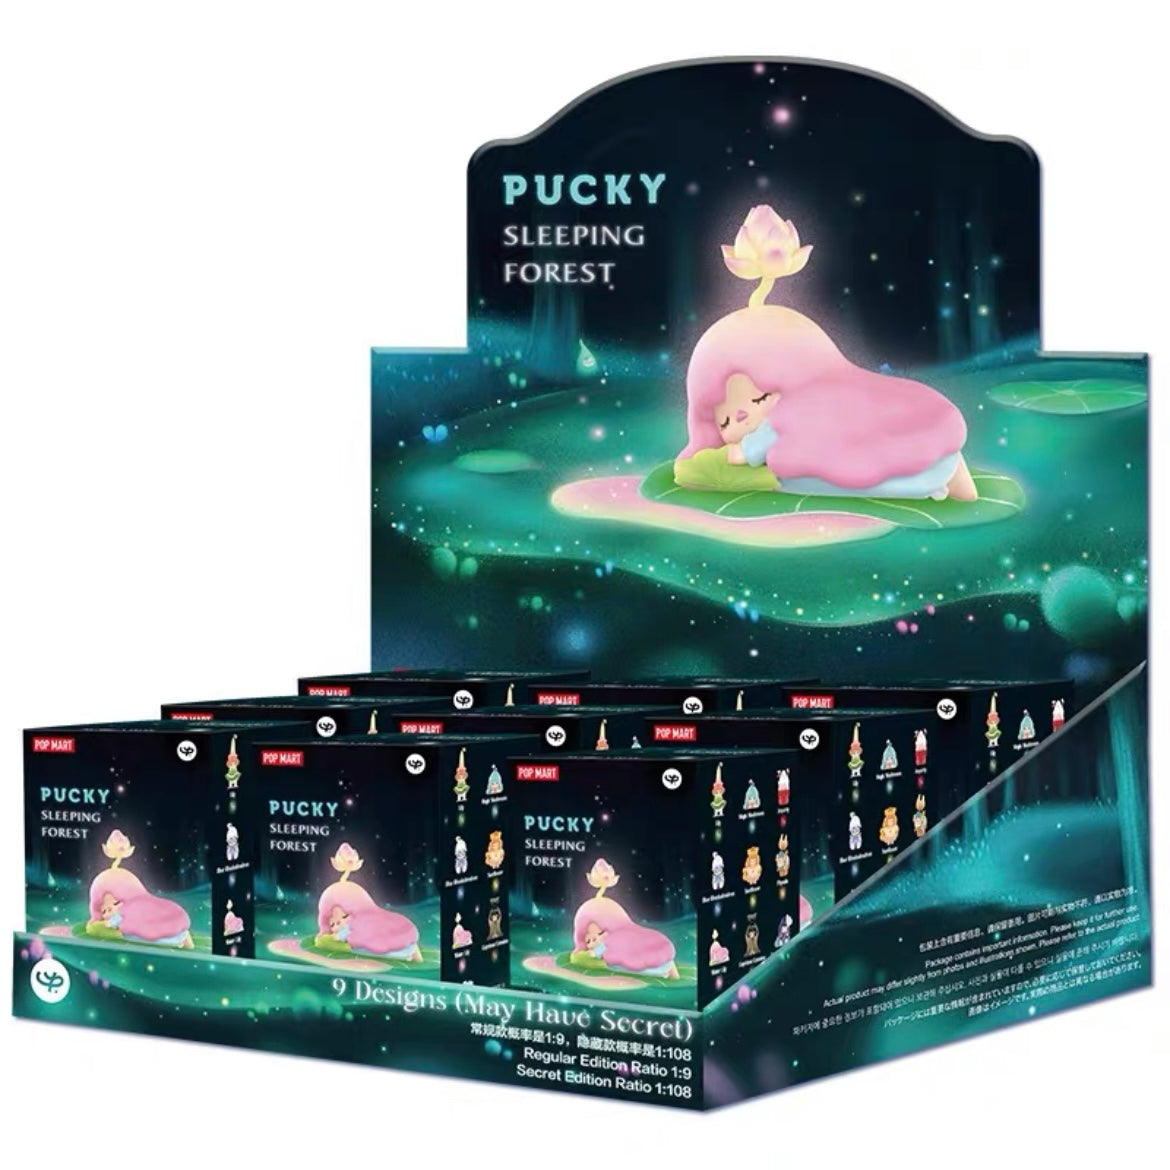 Pucky Sleeping Forest Series Blind Box